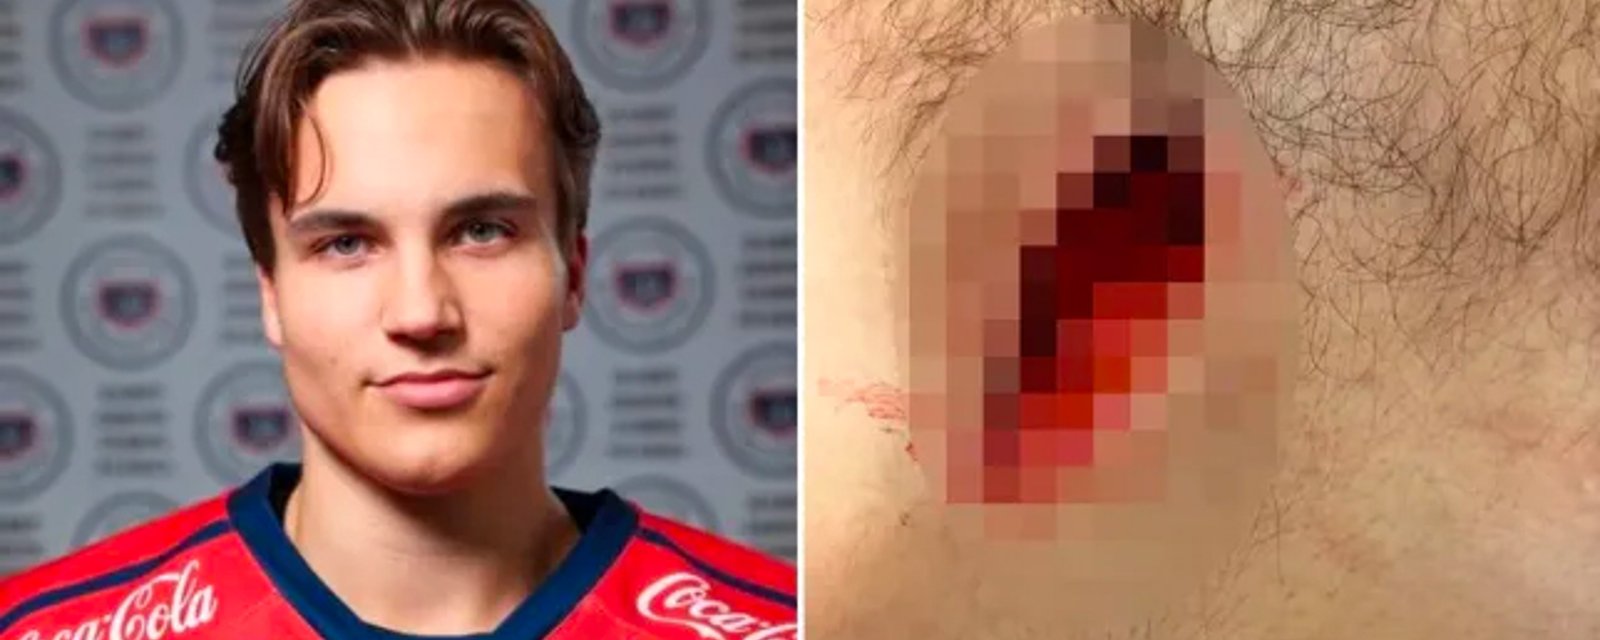 19-year-old D-man has chest slashed open just weeks after Adam Johnson’s death